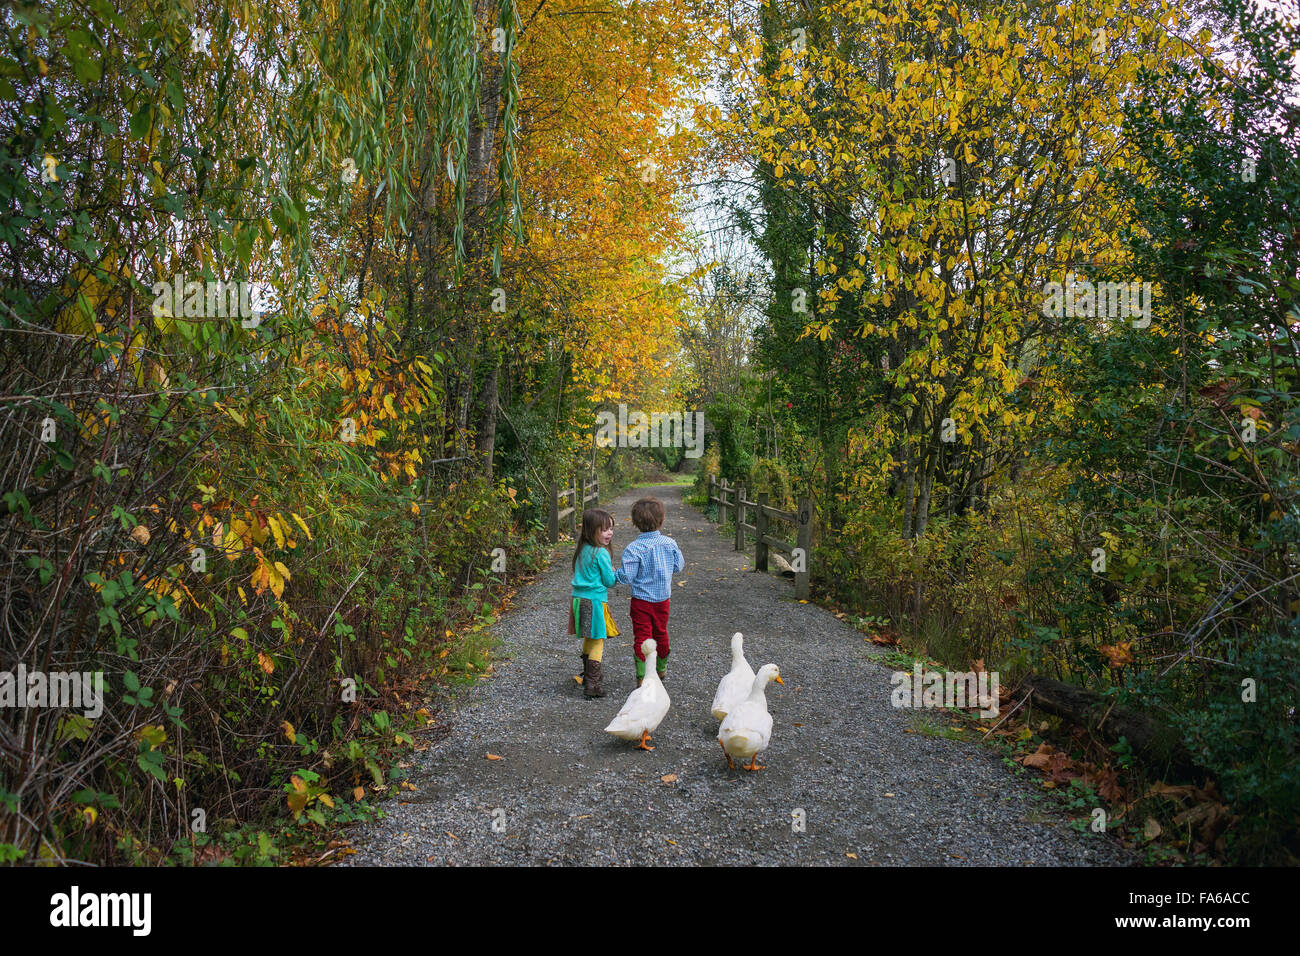 Young boy and girl walking on path with three ducks Stock Photo